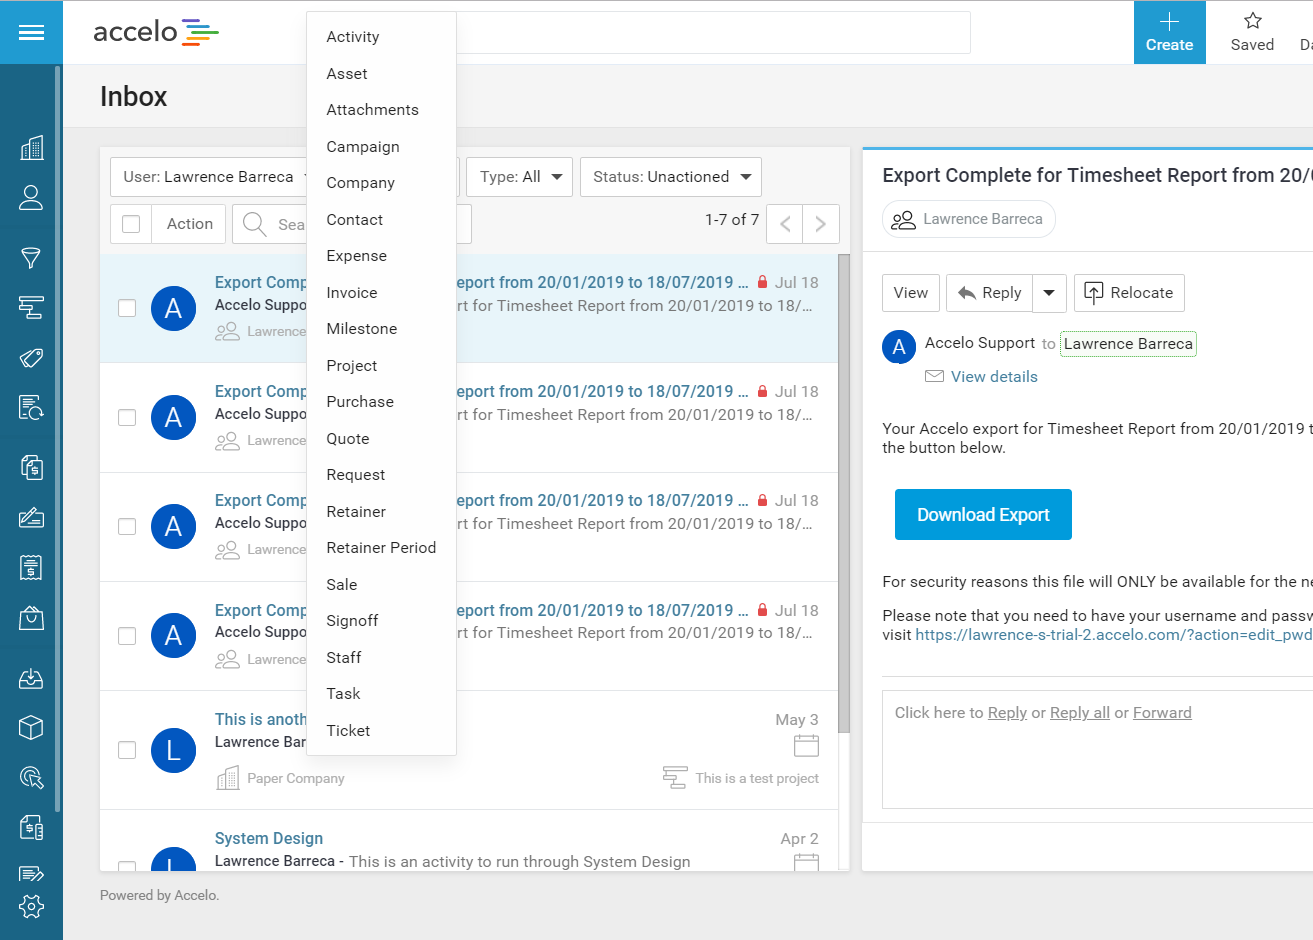 Accelo's team inbox with global search feature for messages